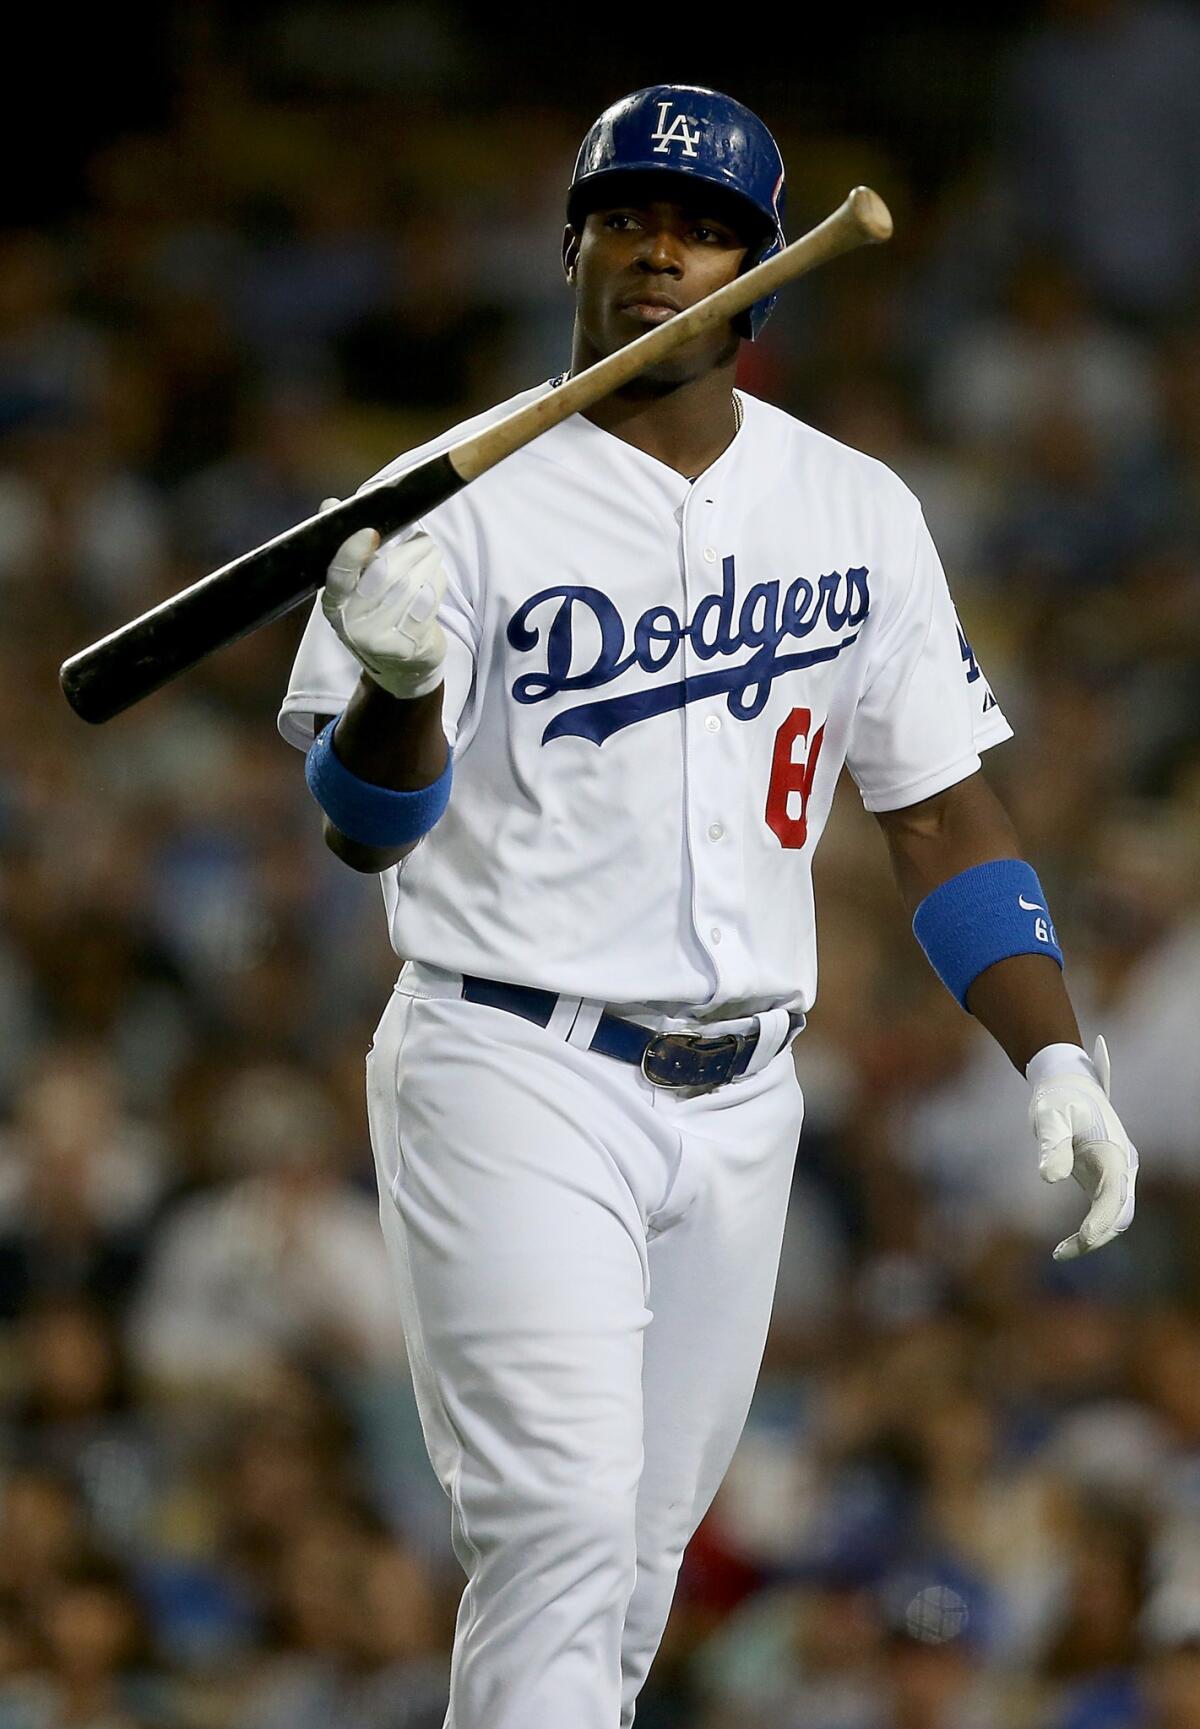 Dodgers right fielder Yasiel Puig twirls his bat after striking out in the fifth inning of a 3-2 loss to the Chicago Cubs on Tuesday.